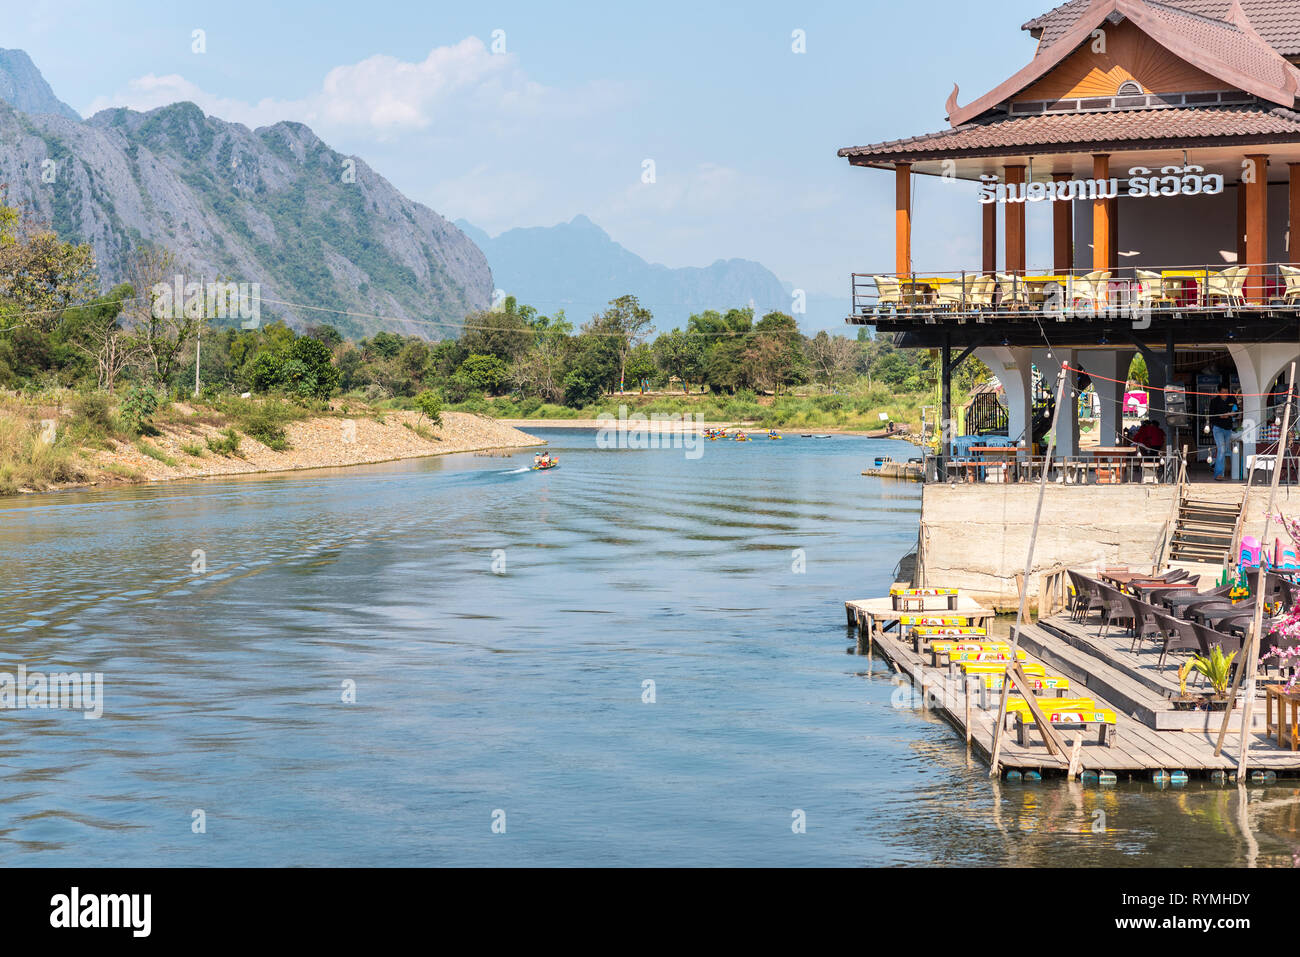 Vang Vieng, Laos - December 28, 2018: a riverside restaurant, the Nam Song River and mountain scenery in the background. Stock Photo